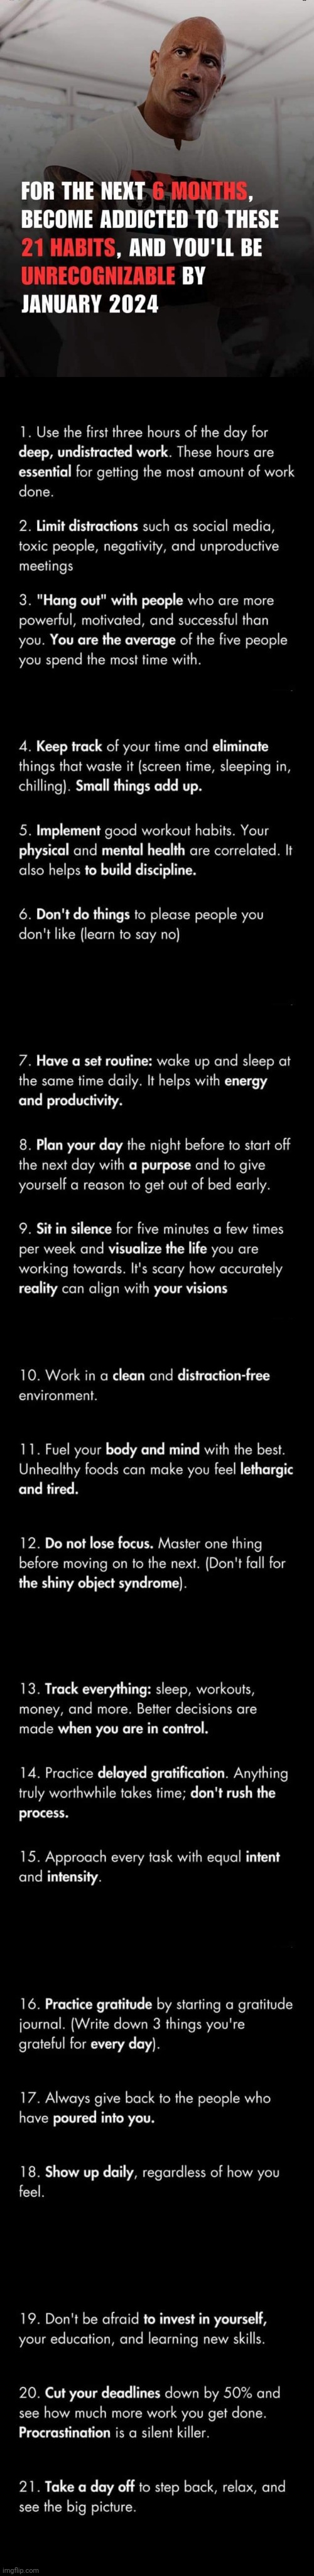 21 Habits To Become Unrecognizable In The Next 6 Months :> | image tagged in simothefinlandized,masculinity,self-improvement,infographic,tutorial | made w/ Imgflip meme maker